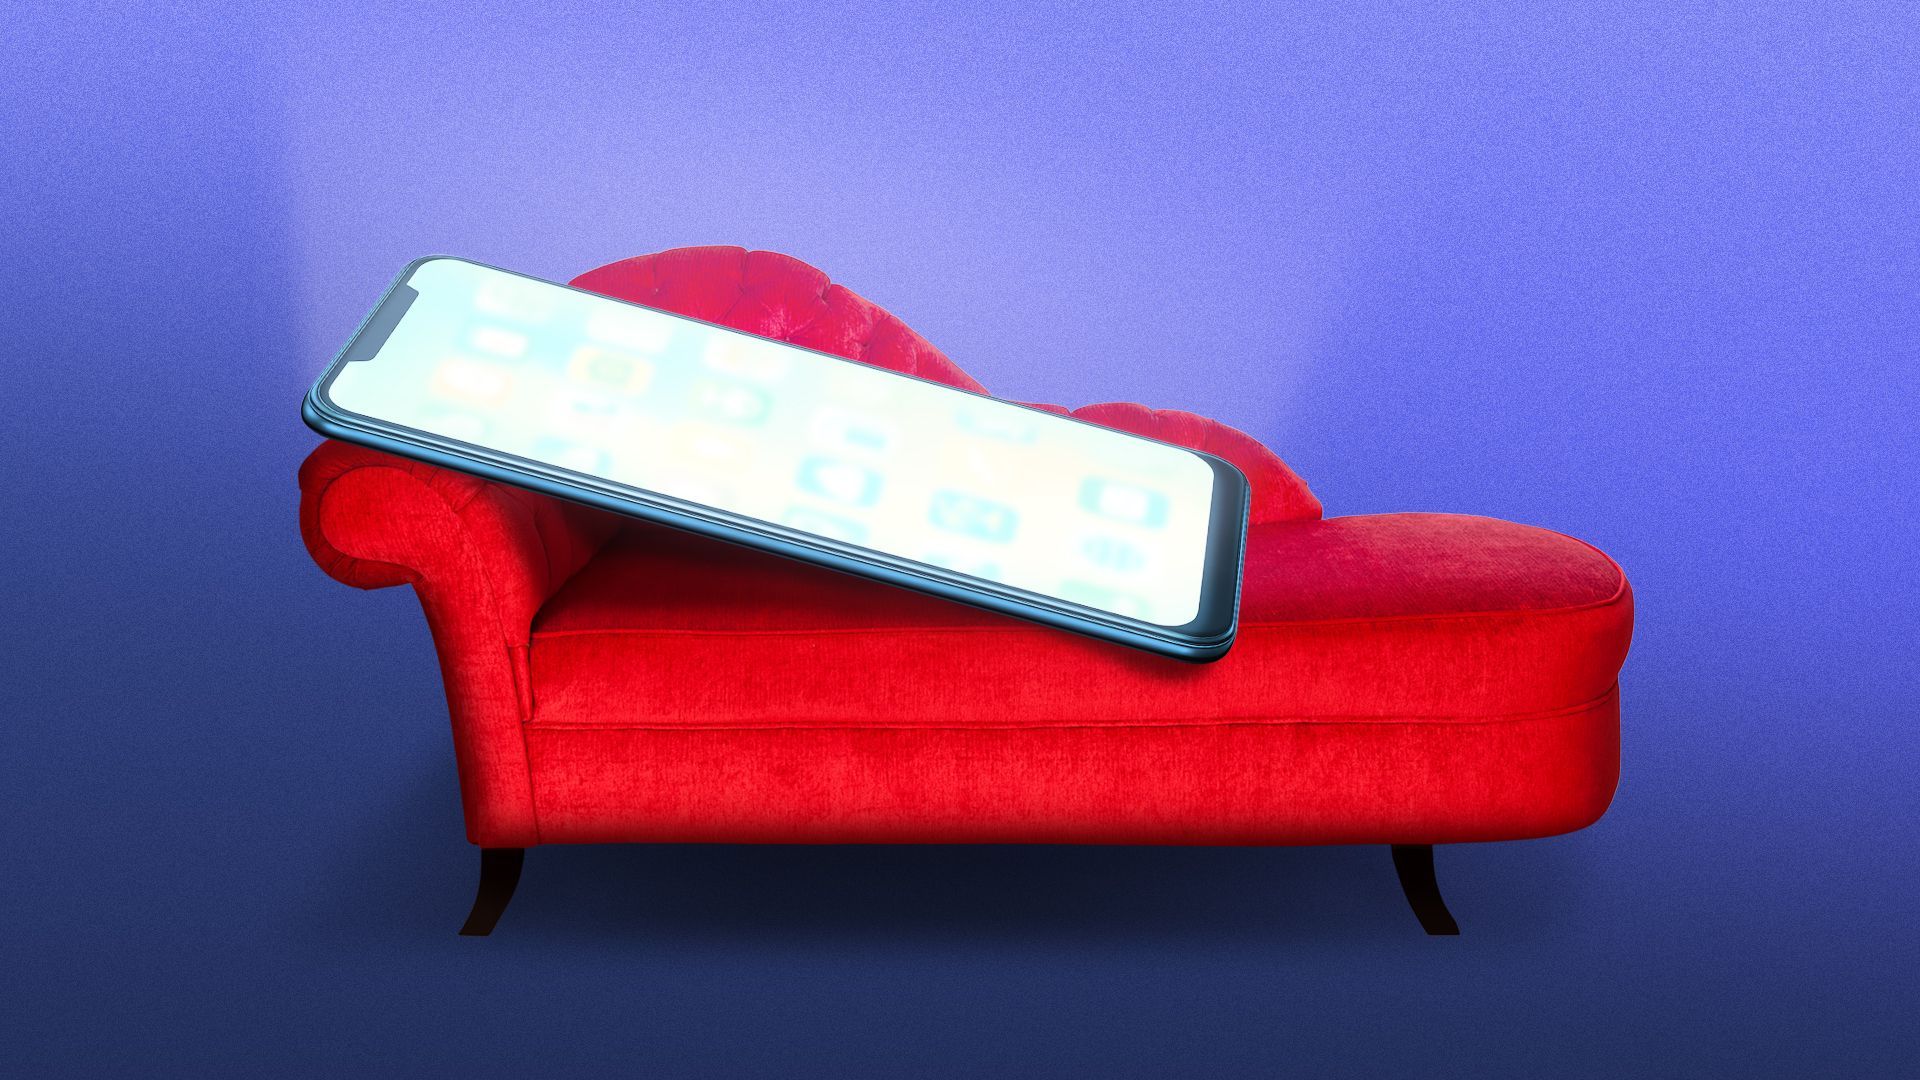 Illustration of a cell phone on a therapy couch